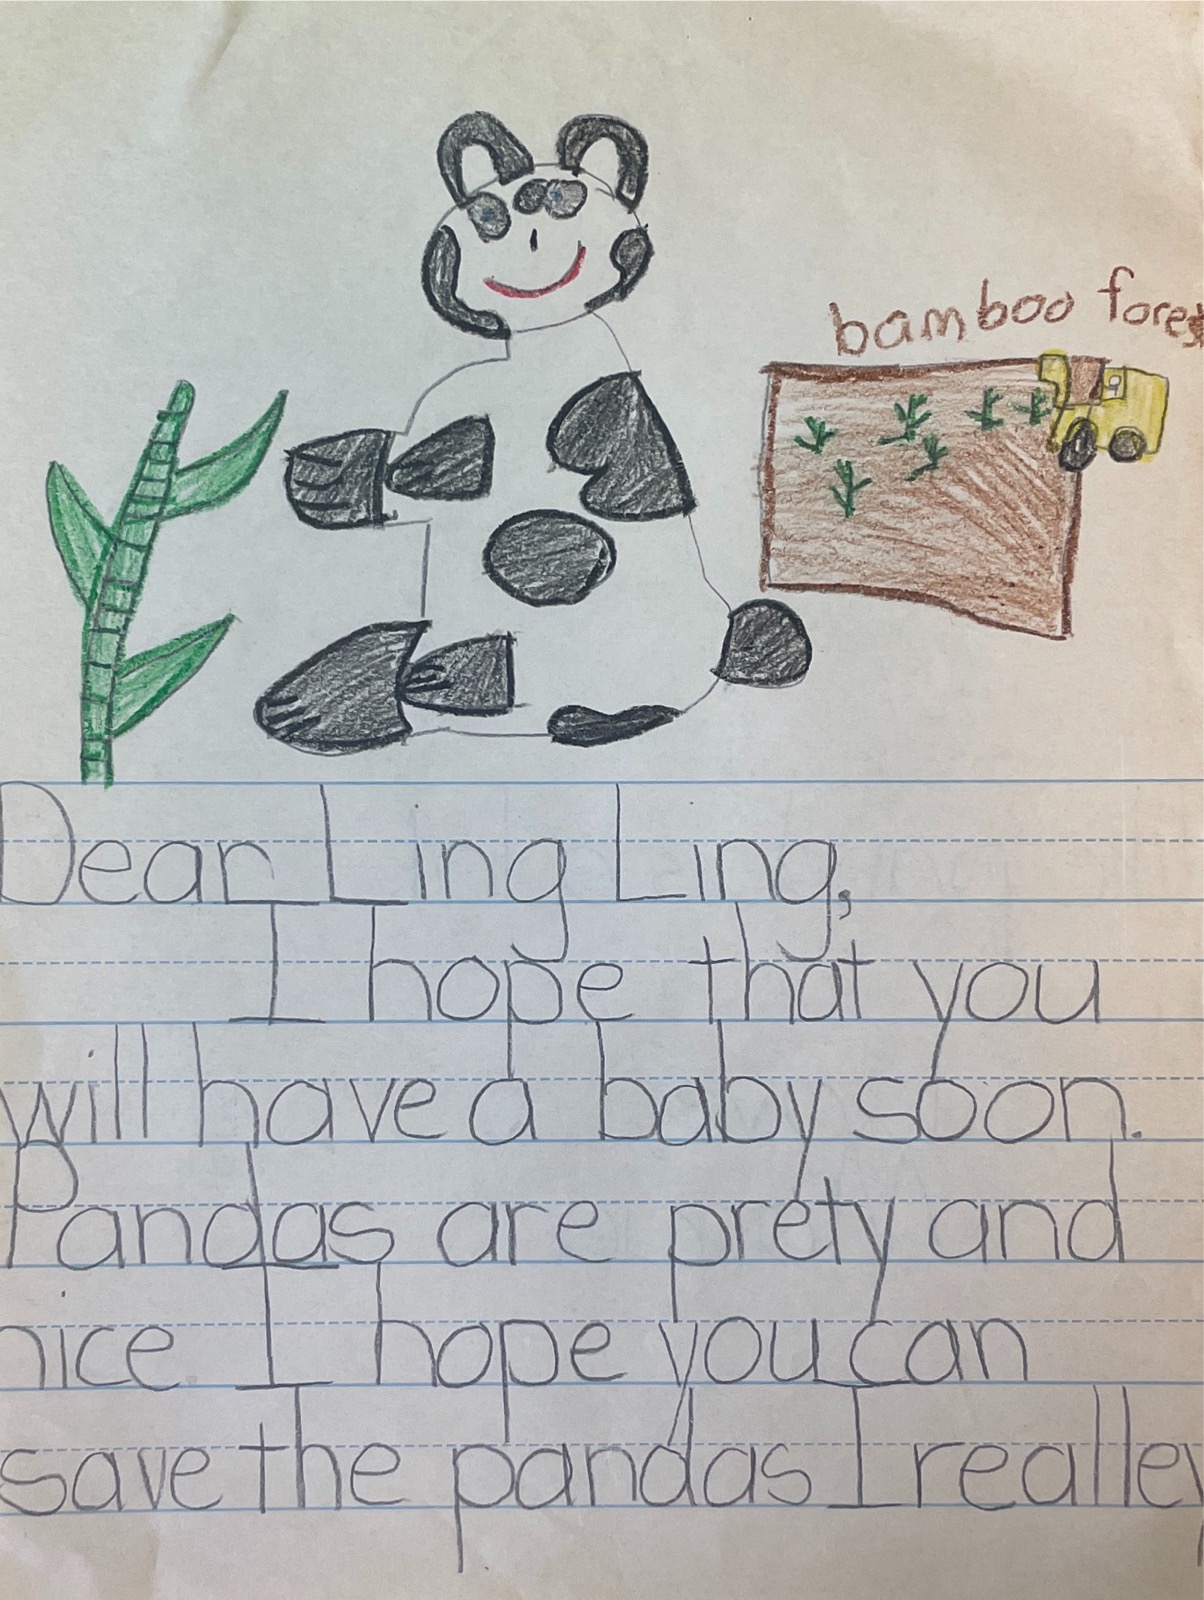 Letter to Ling-Ling. Marcia hoped that Ling-Ling will have a baby soon, and shares that the pandas a